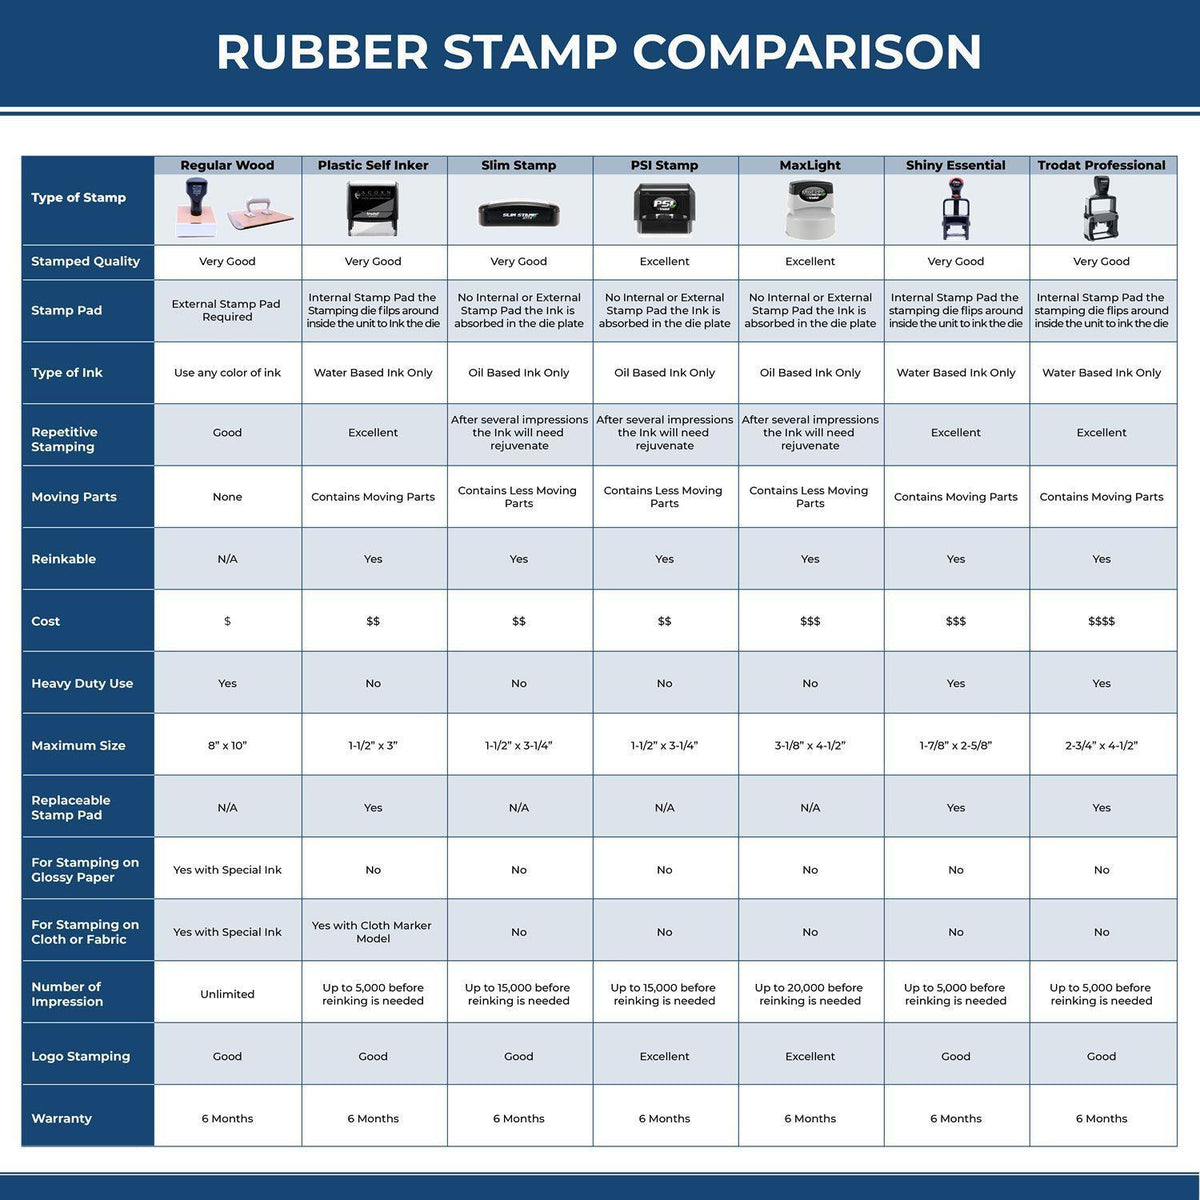 Large Bold Distributed Rubber Stamp 4880R Rubber Stamp Comparison